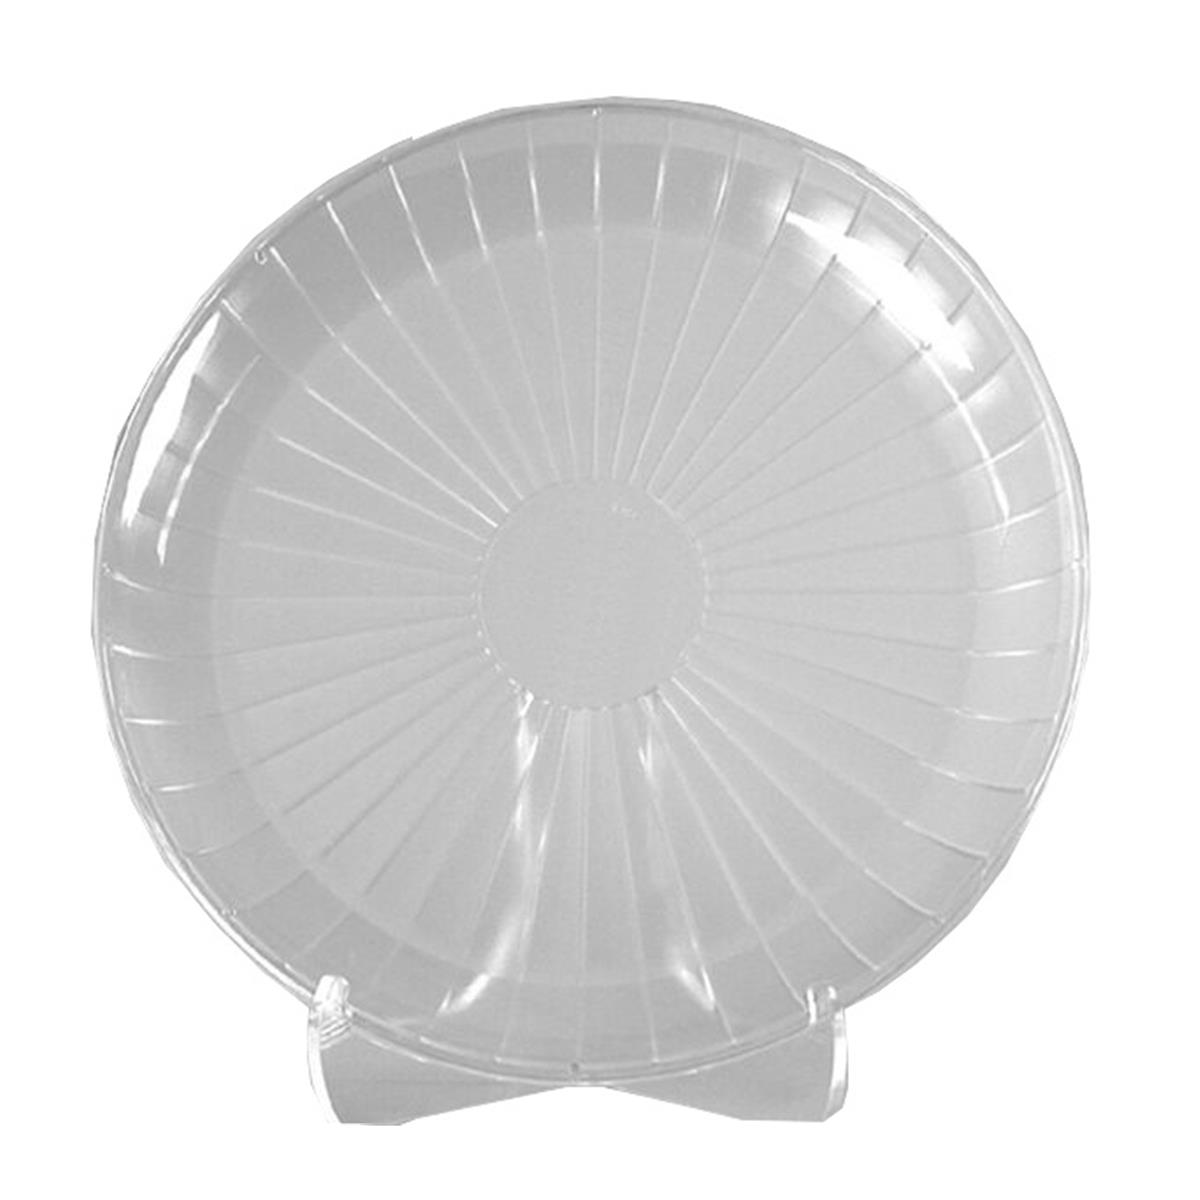 A712pcl25 Pe 12 In. Cater Tray, Clear - Case Of 25